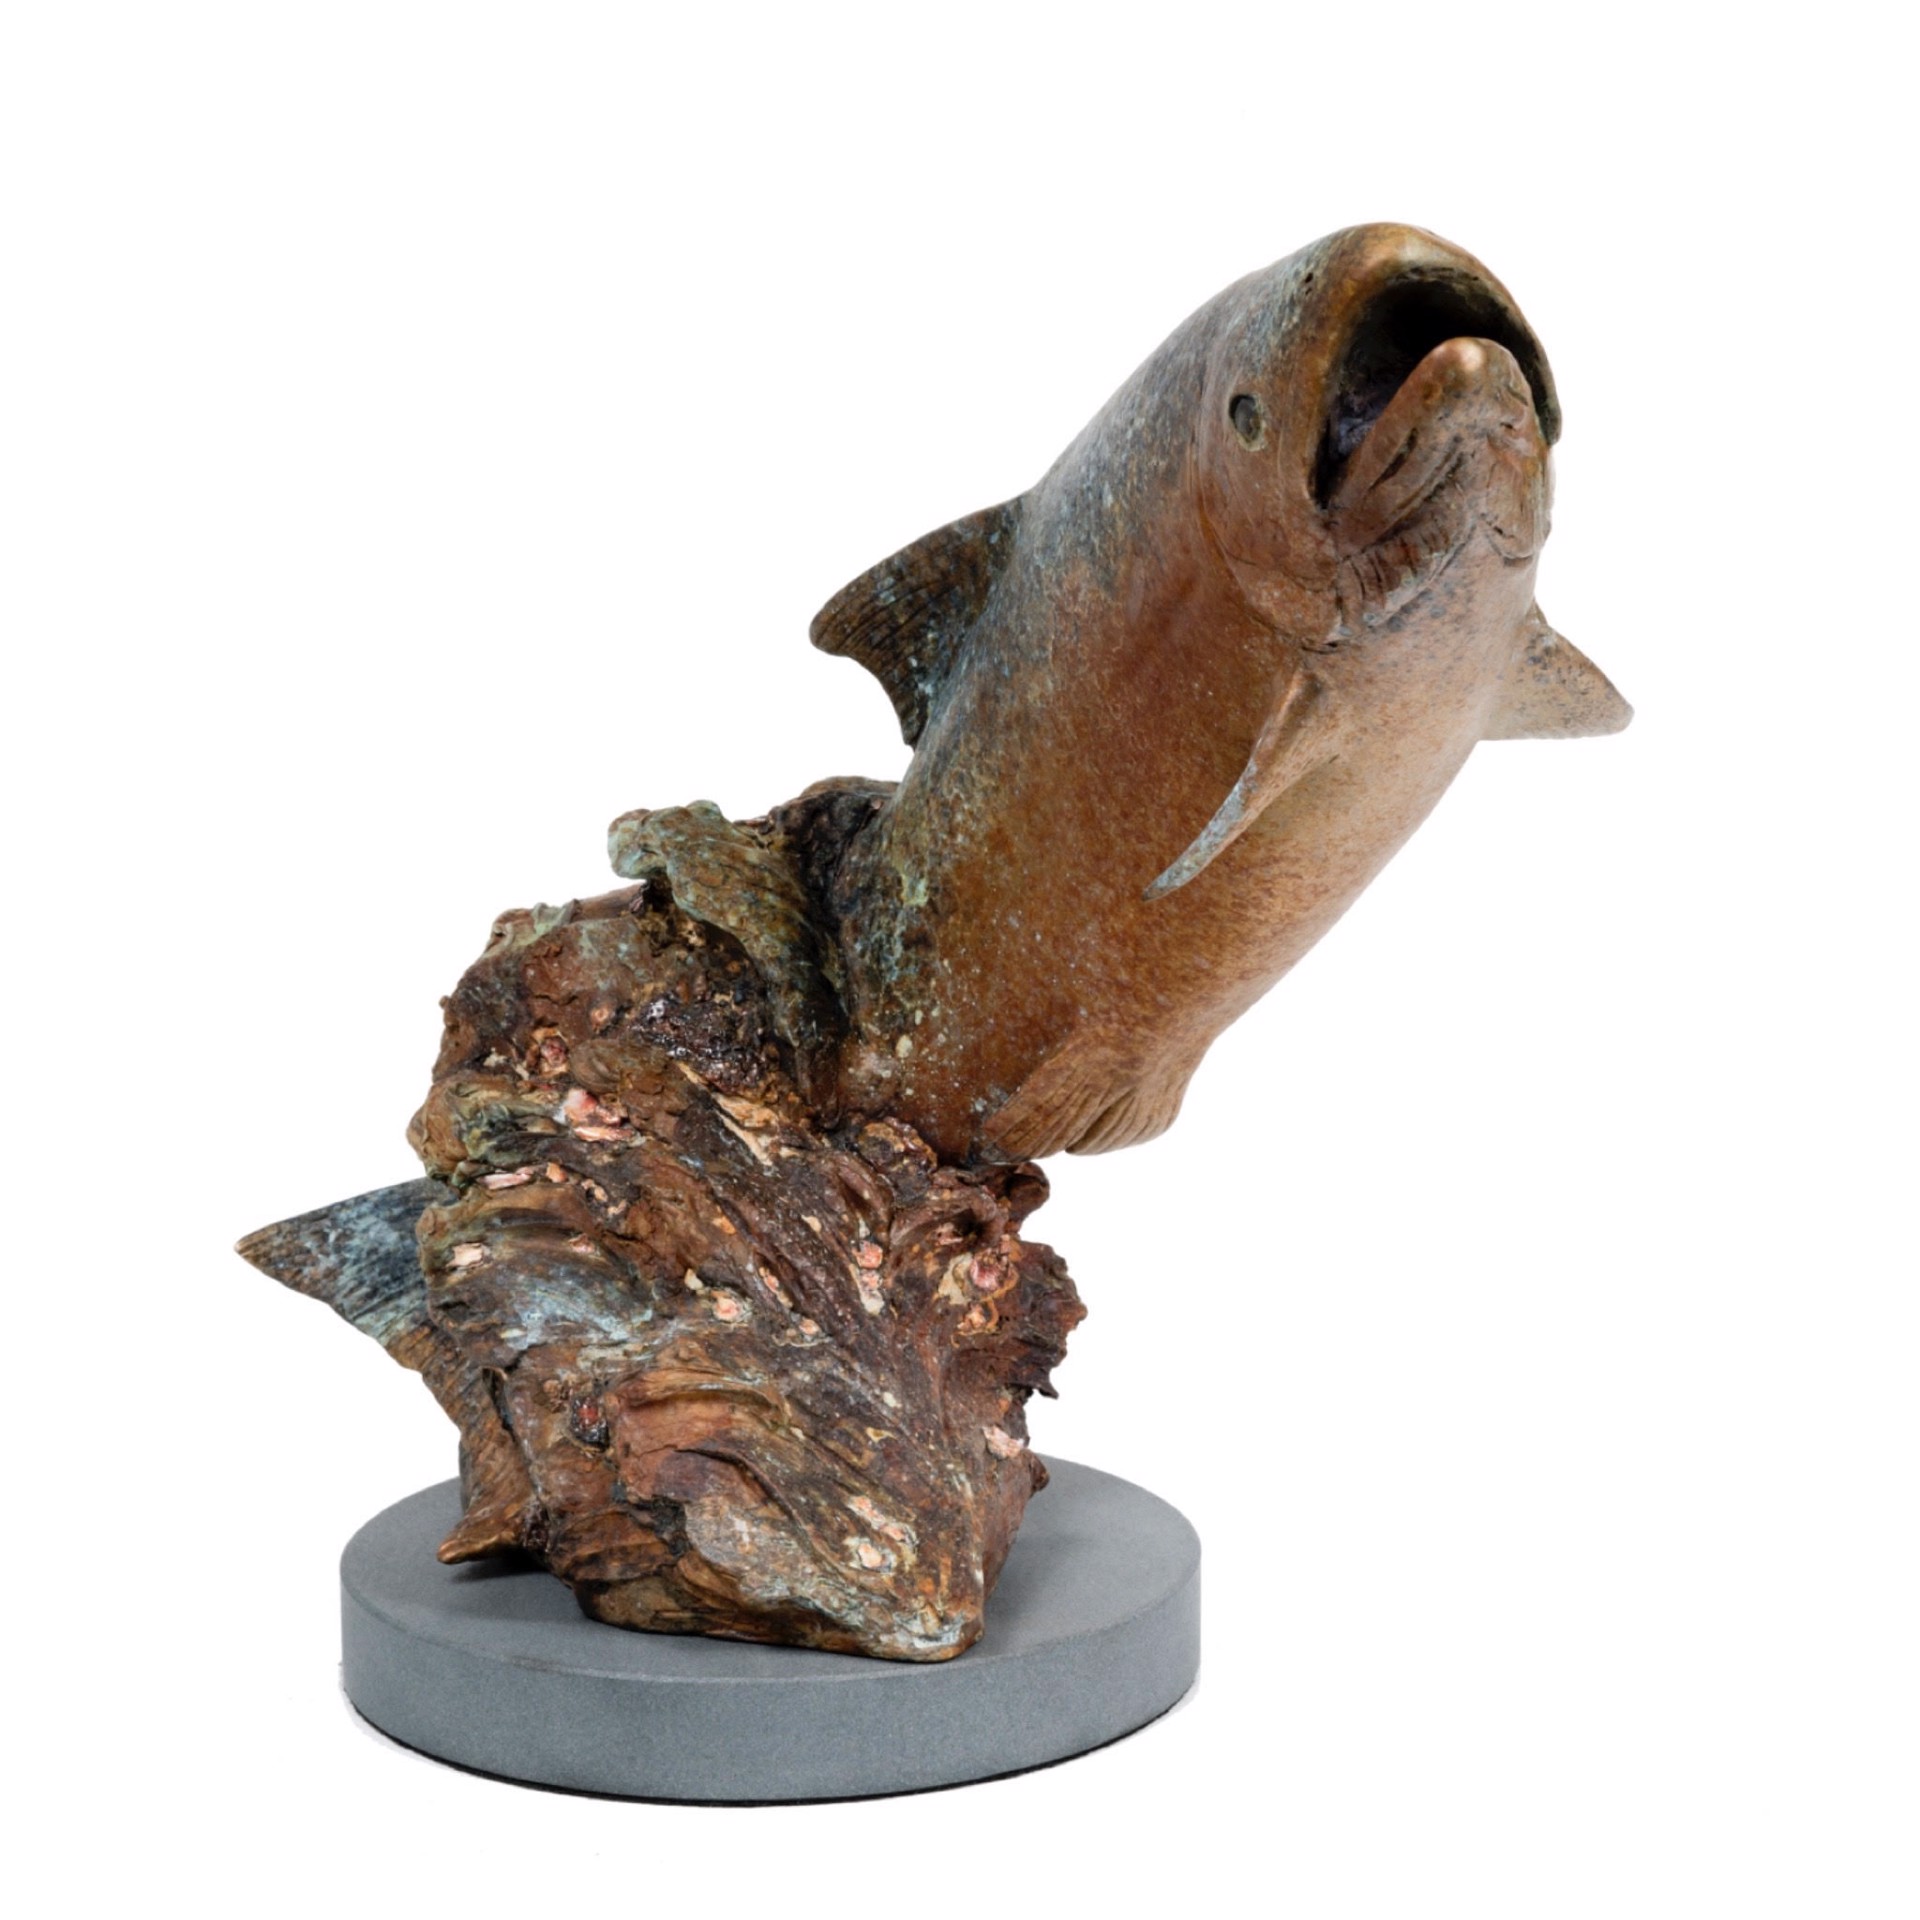 Trout Original Bronze Sculpture by Rip and Alison Caswell, Contemporary Fine Art, Modern Wildlife Art, Available At Gallery Wild